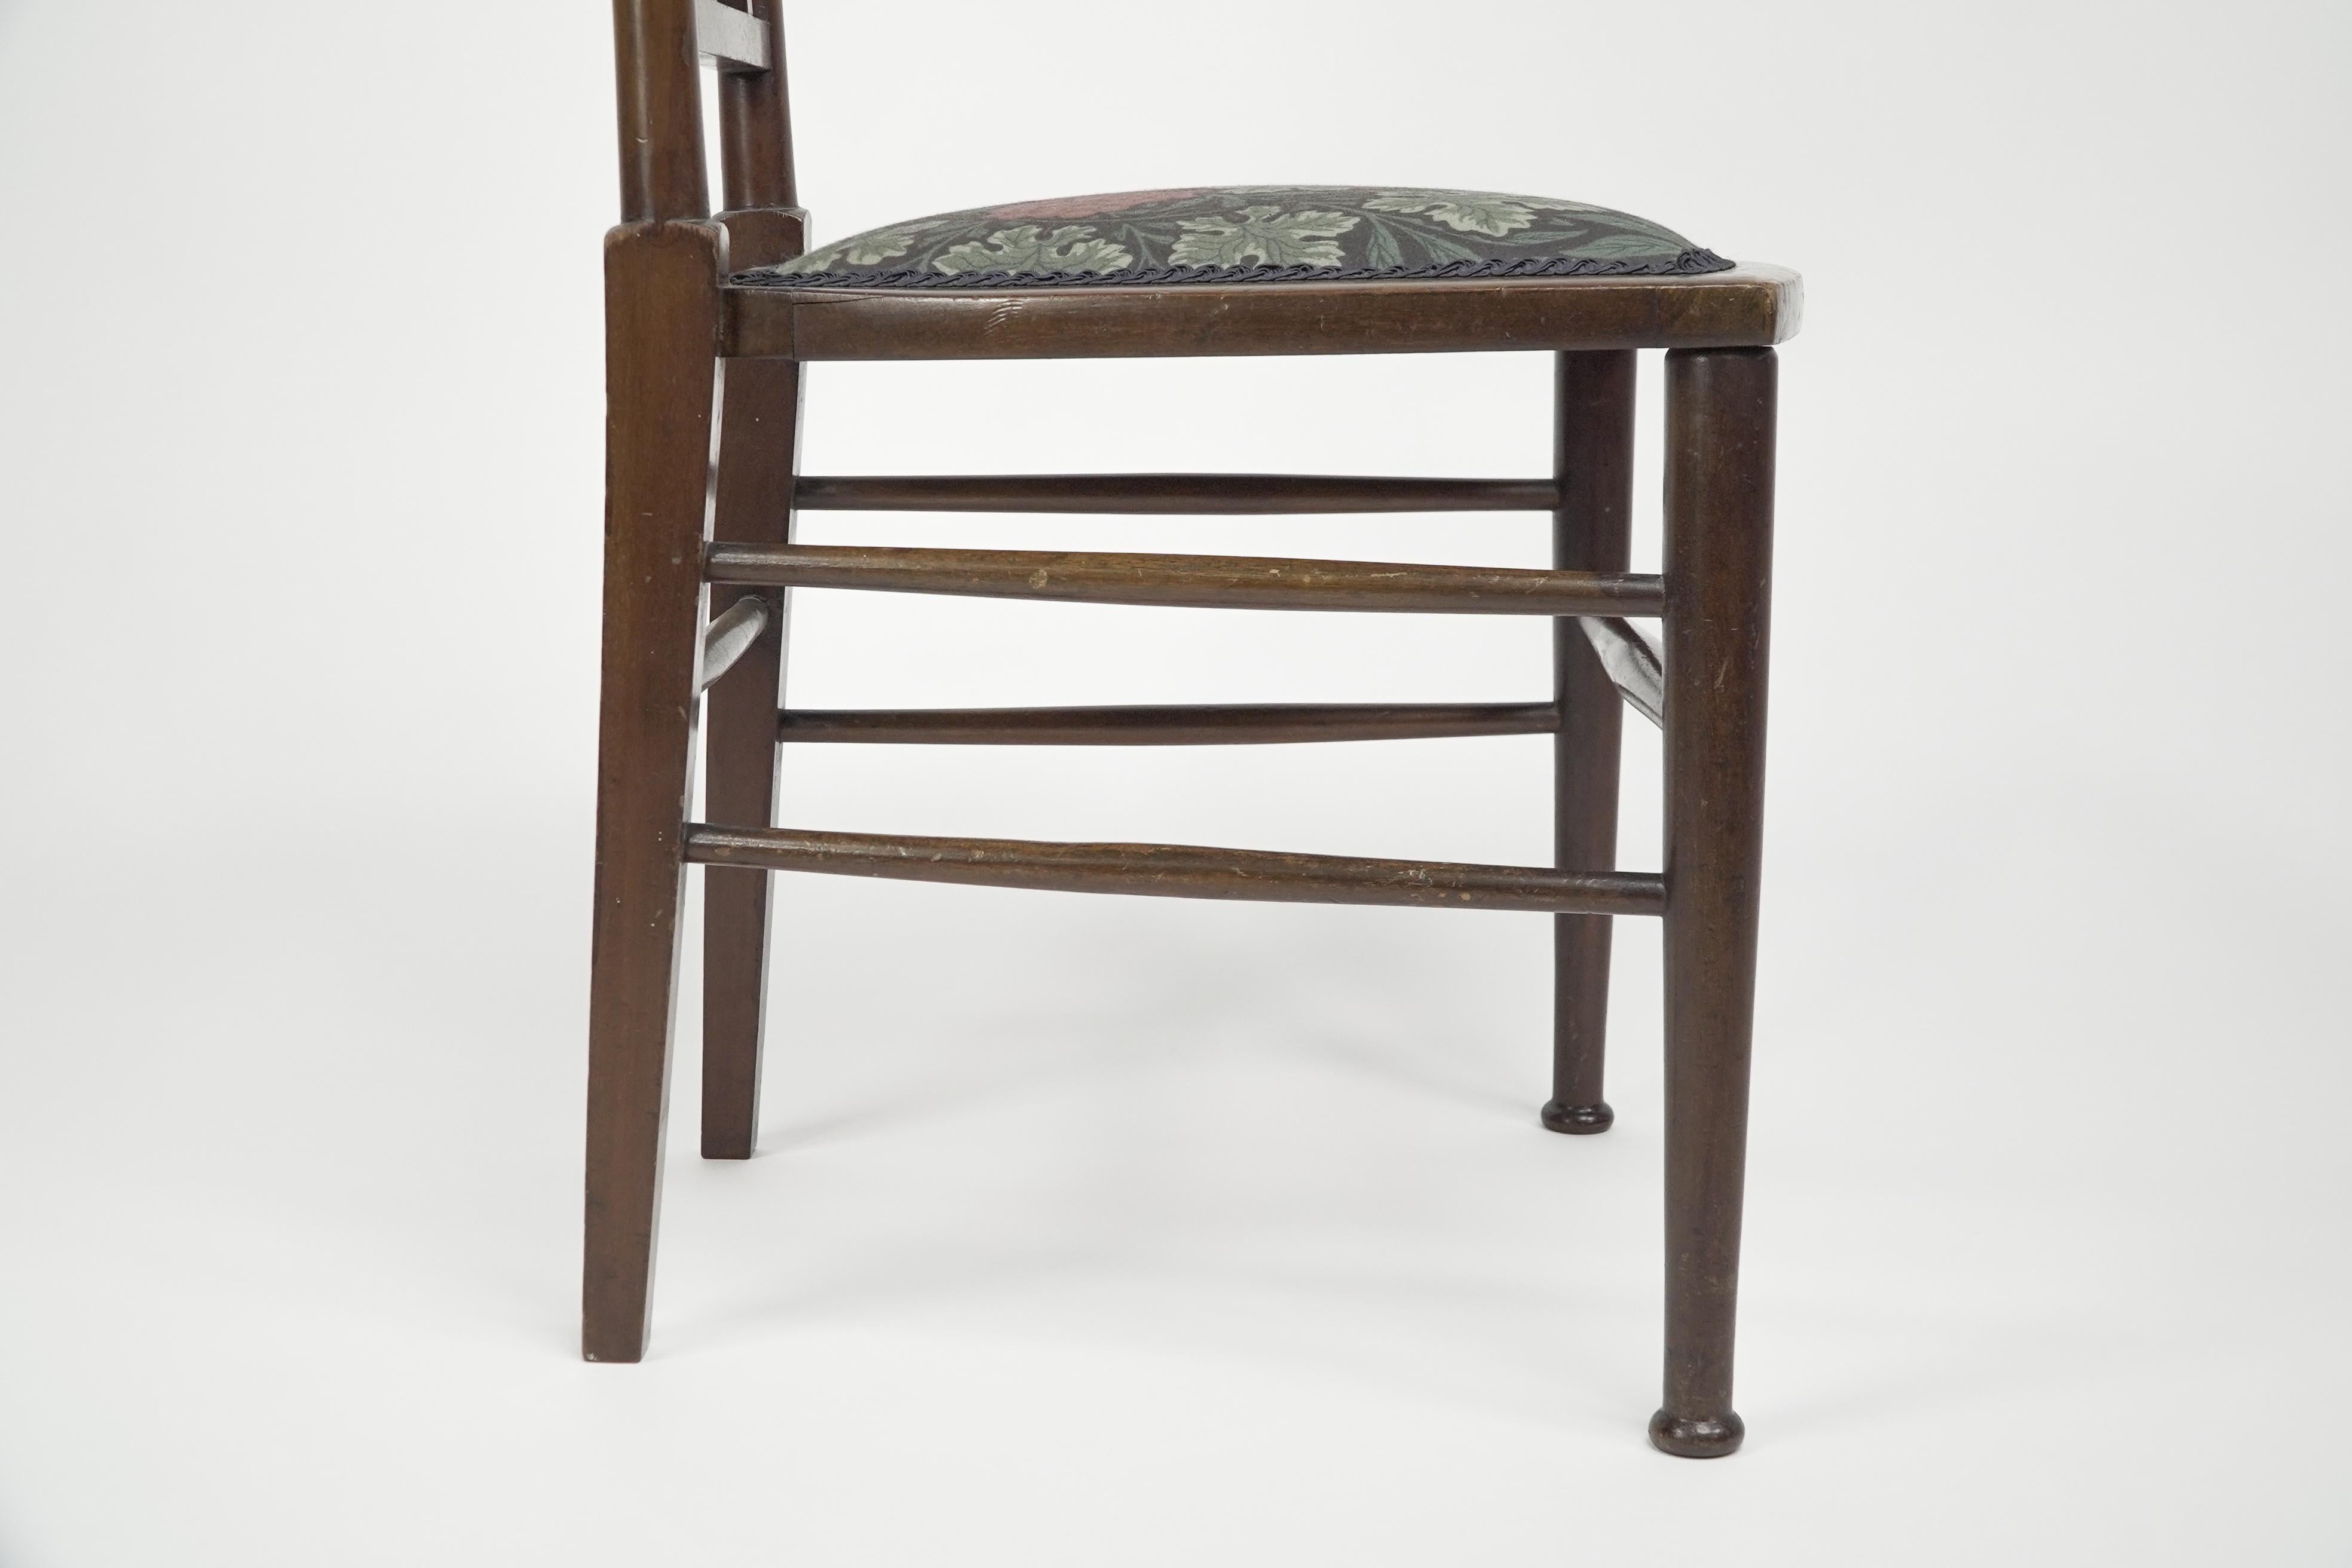 E G Punnett for Liberty & Co. A Walnut side chair with inlaid floral decoration. For Sale 9